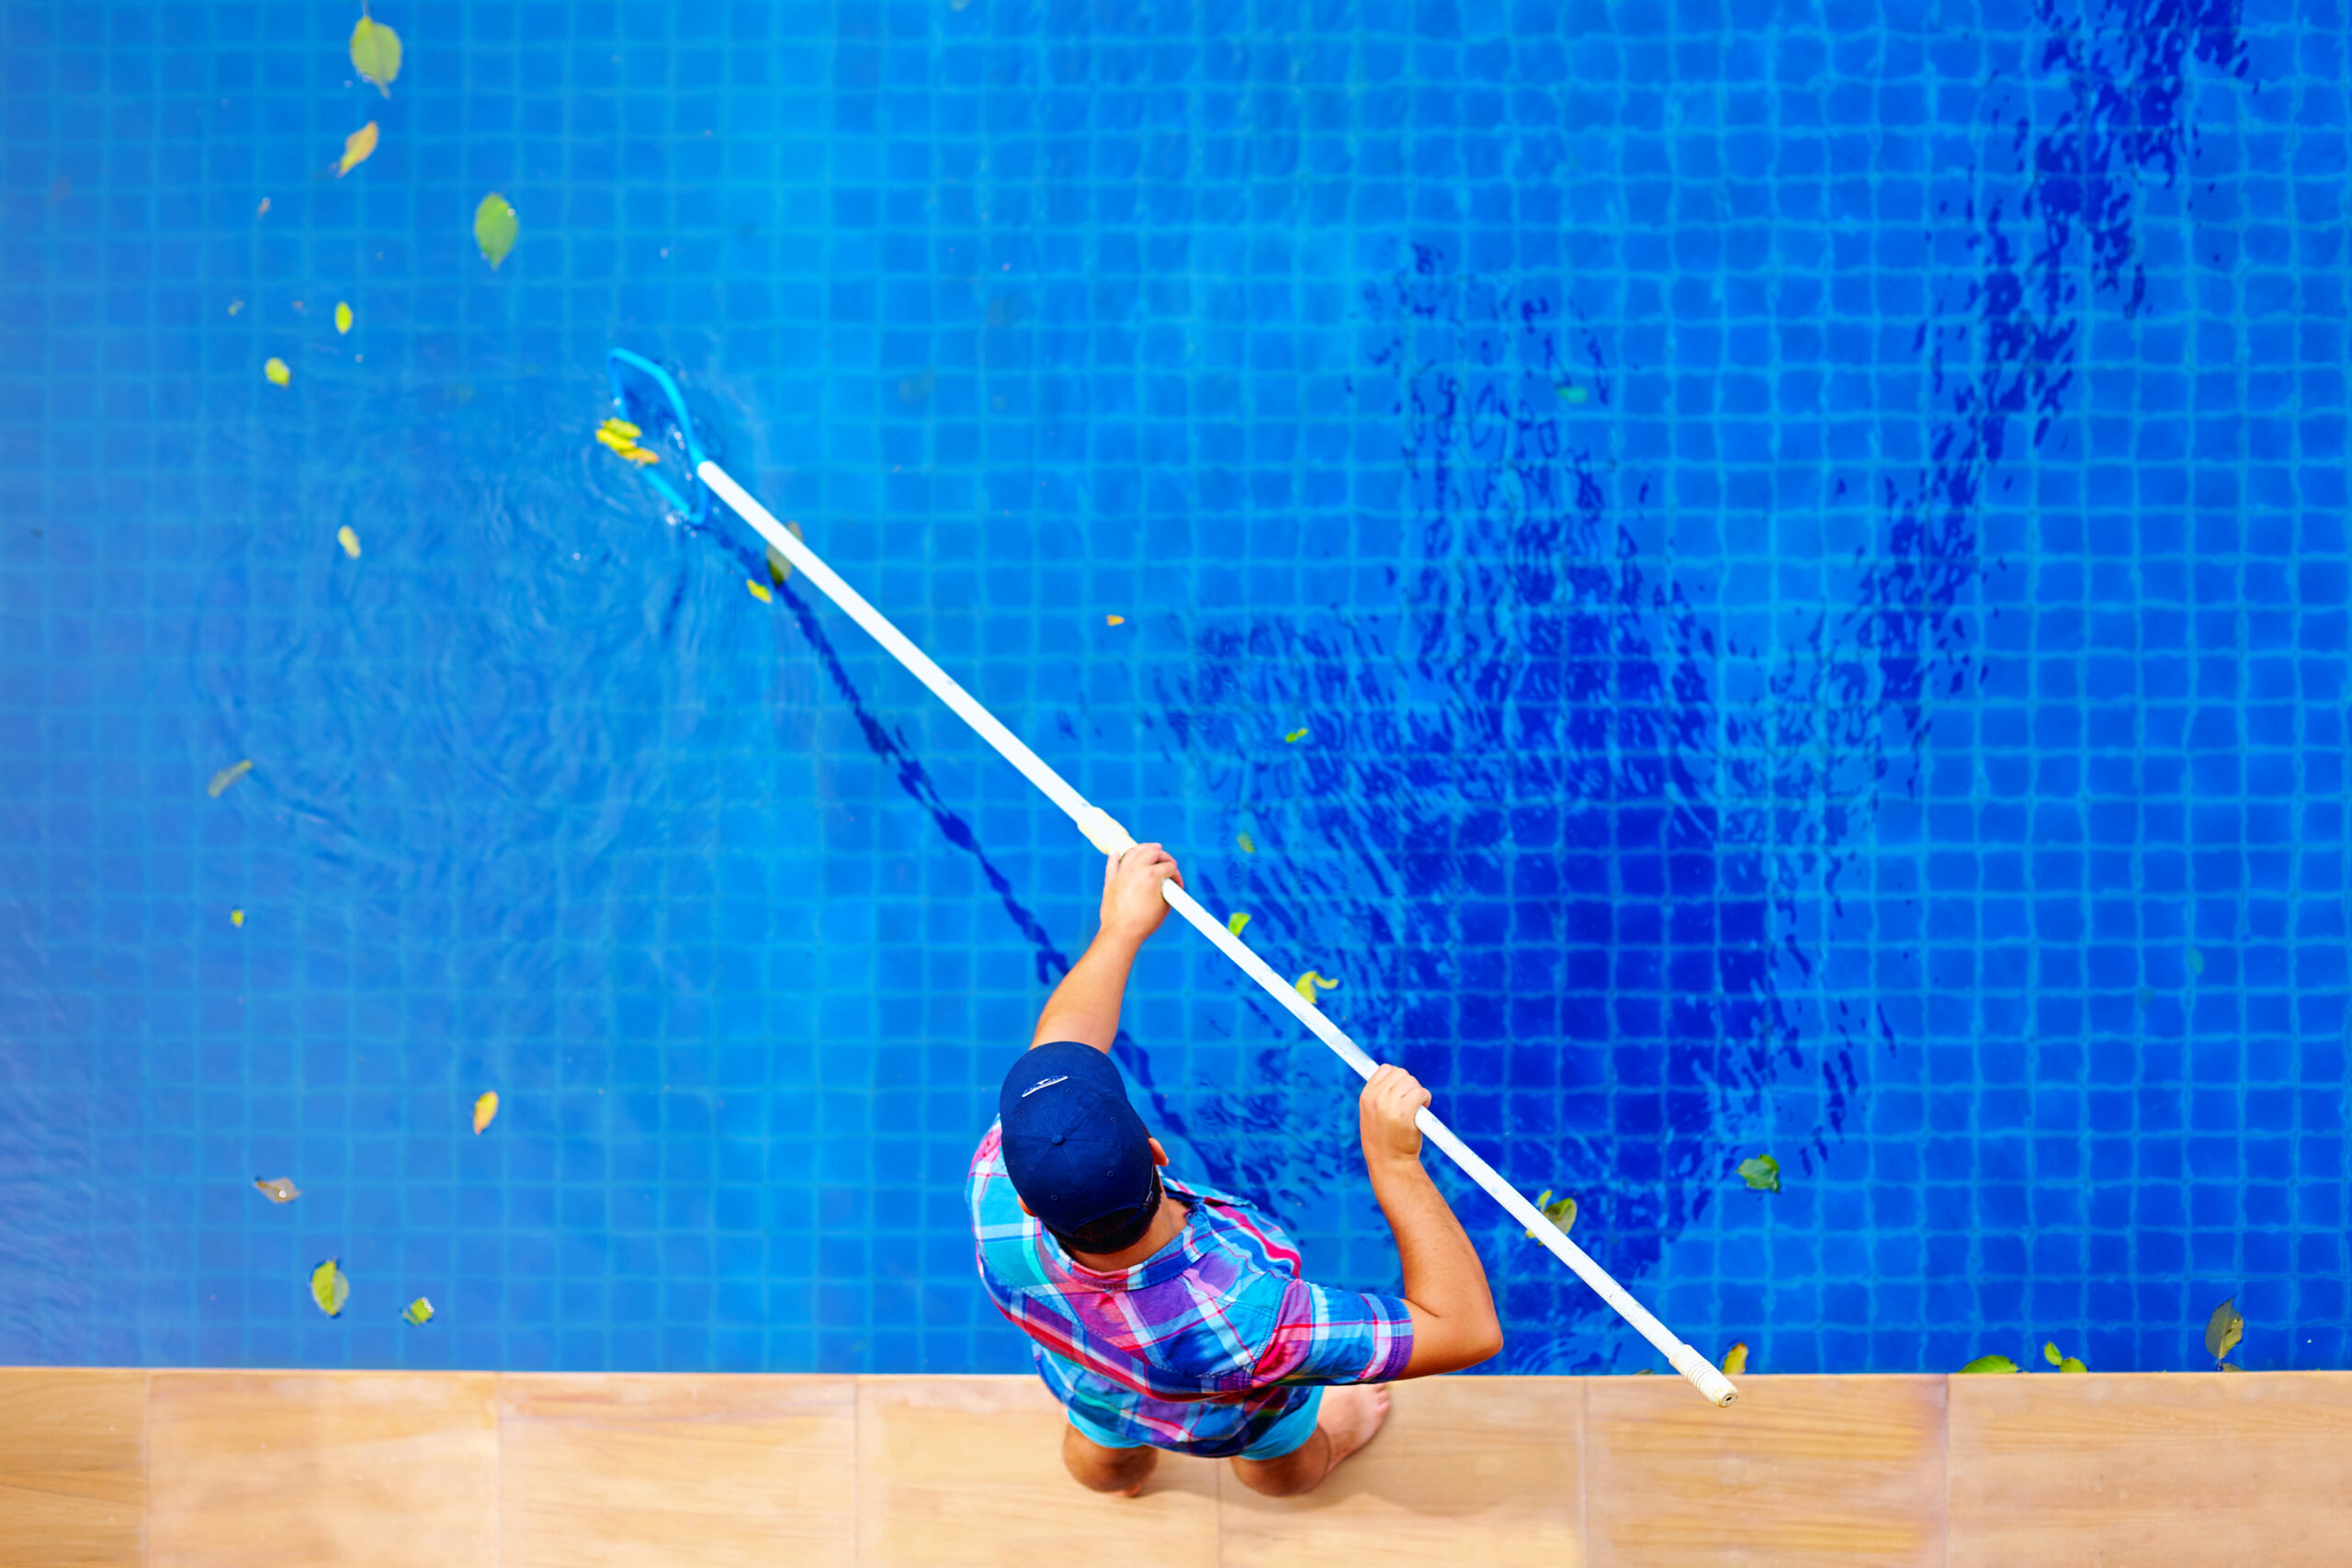 Professional Pool Cleaning Services in Spring, TX: Keeping Your Pool Immaculate